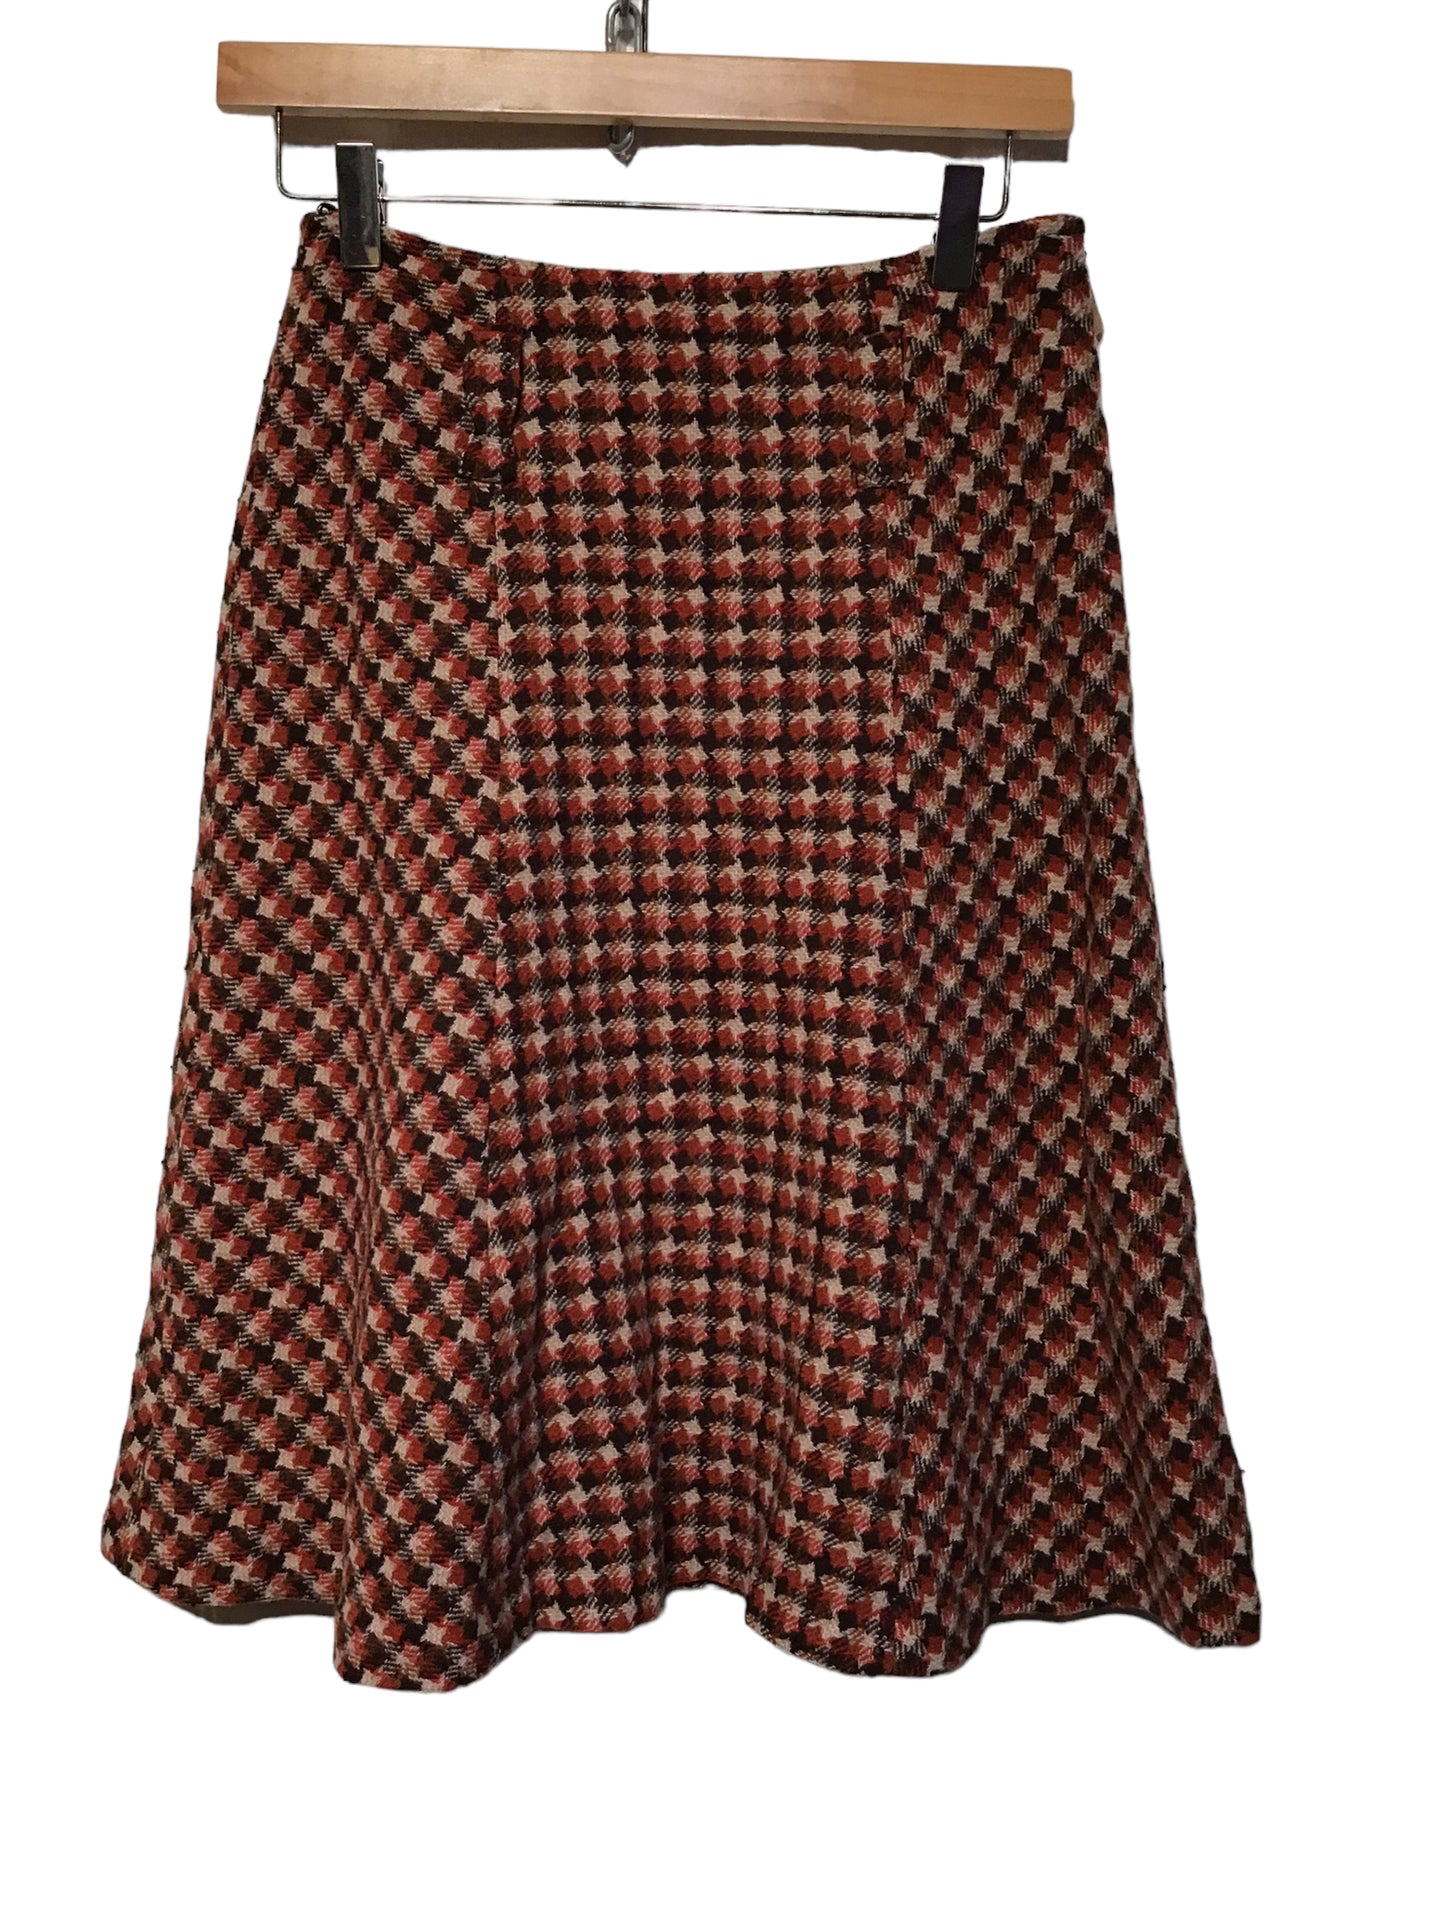 Phase Eight Skirt (Size S)